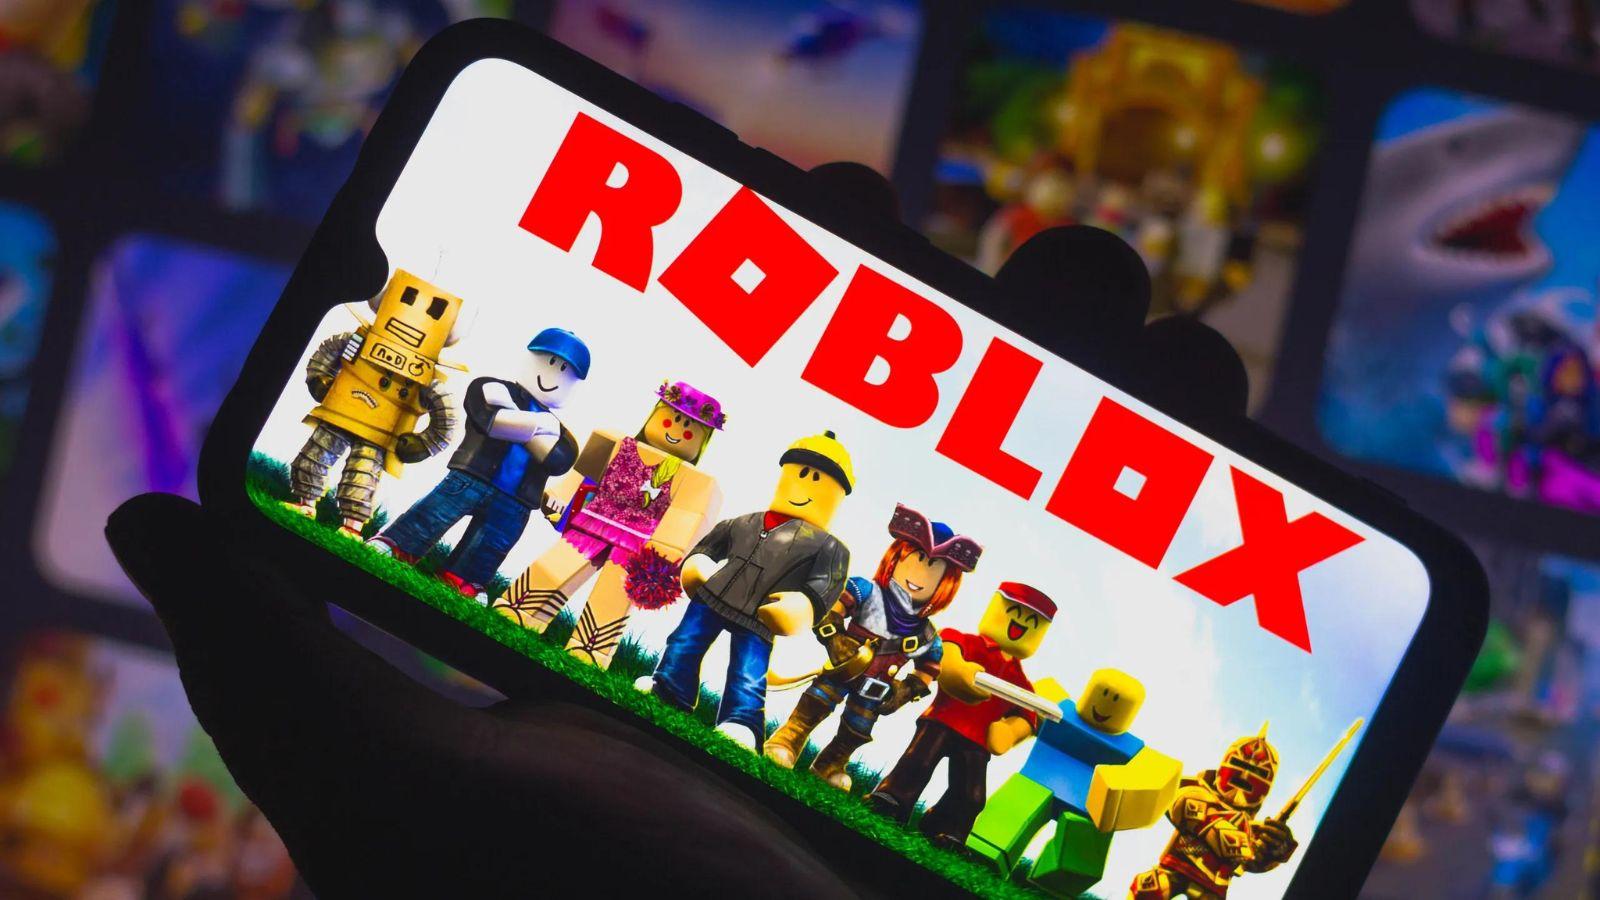 4,000 Roblox Users' Information Leaked Through Data Breach